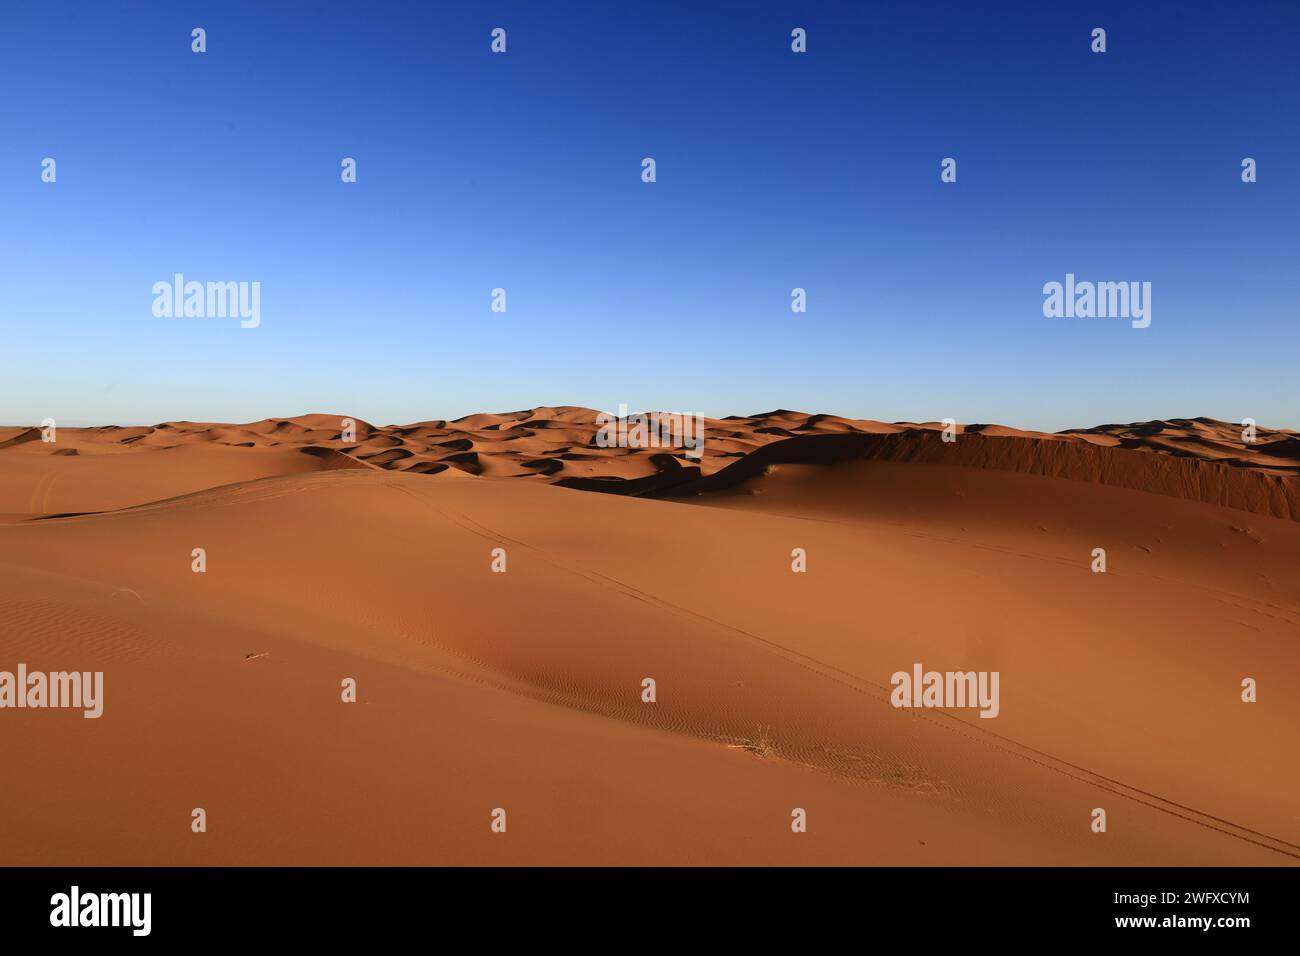 Erg Chebbi is one of Morocco's several ergs which is a large seas of dunes formed by wind-blown sand. Stock Photo